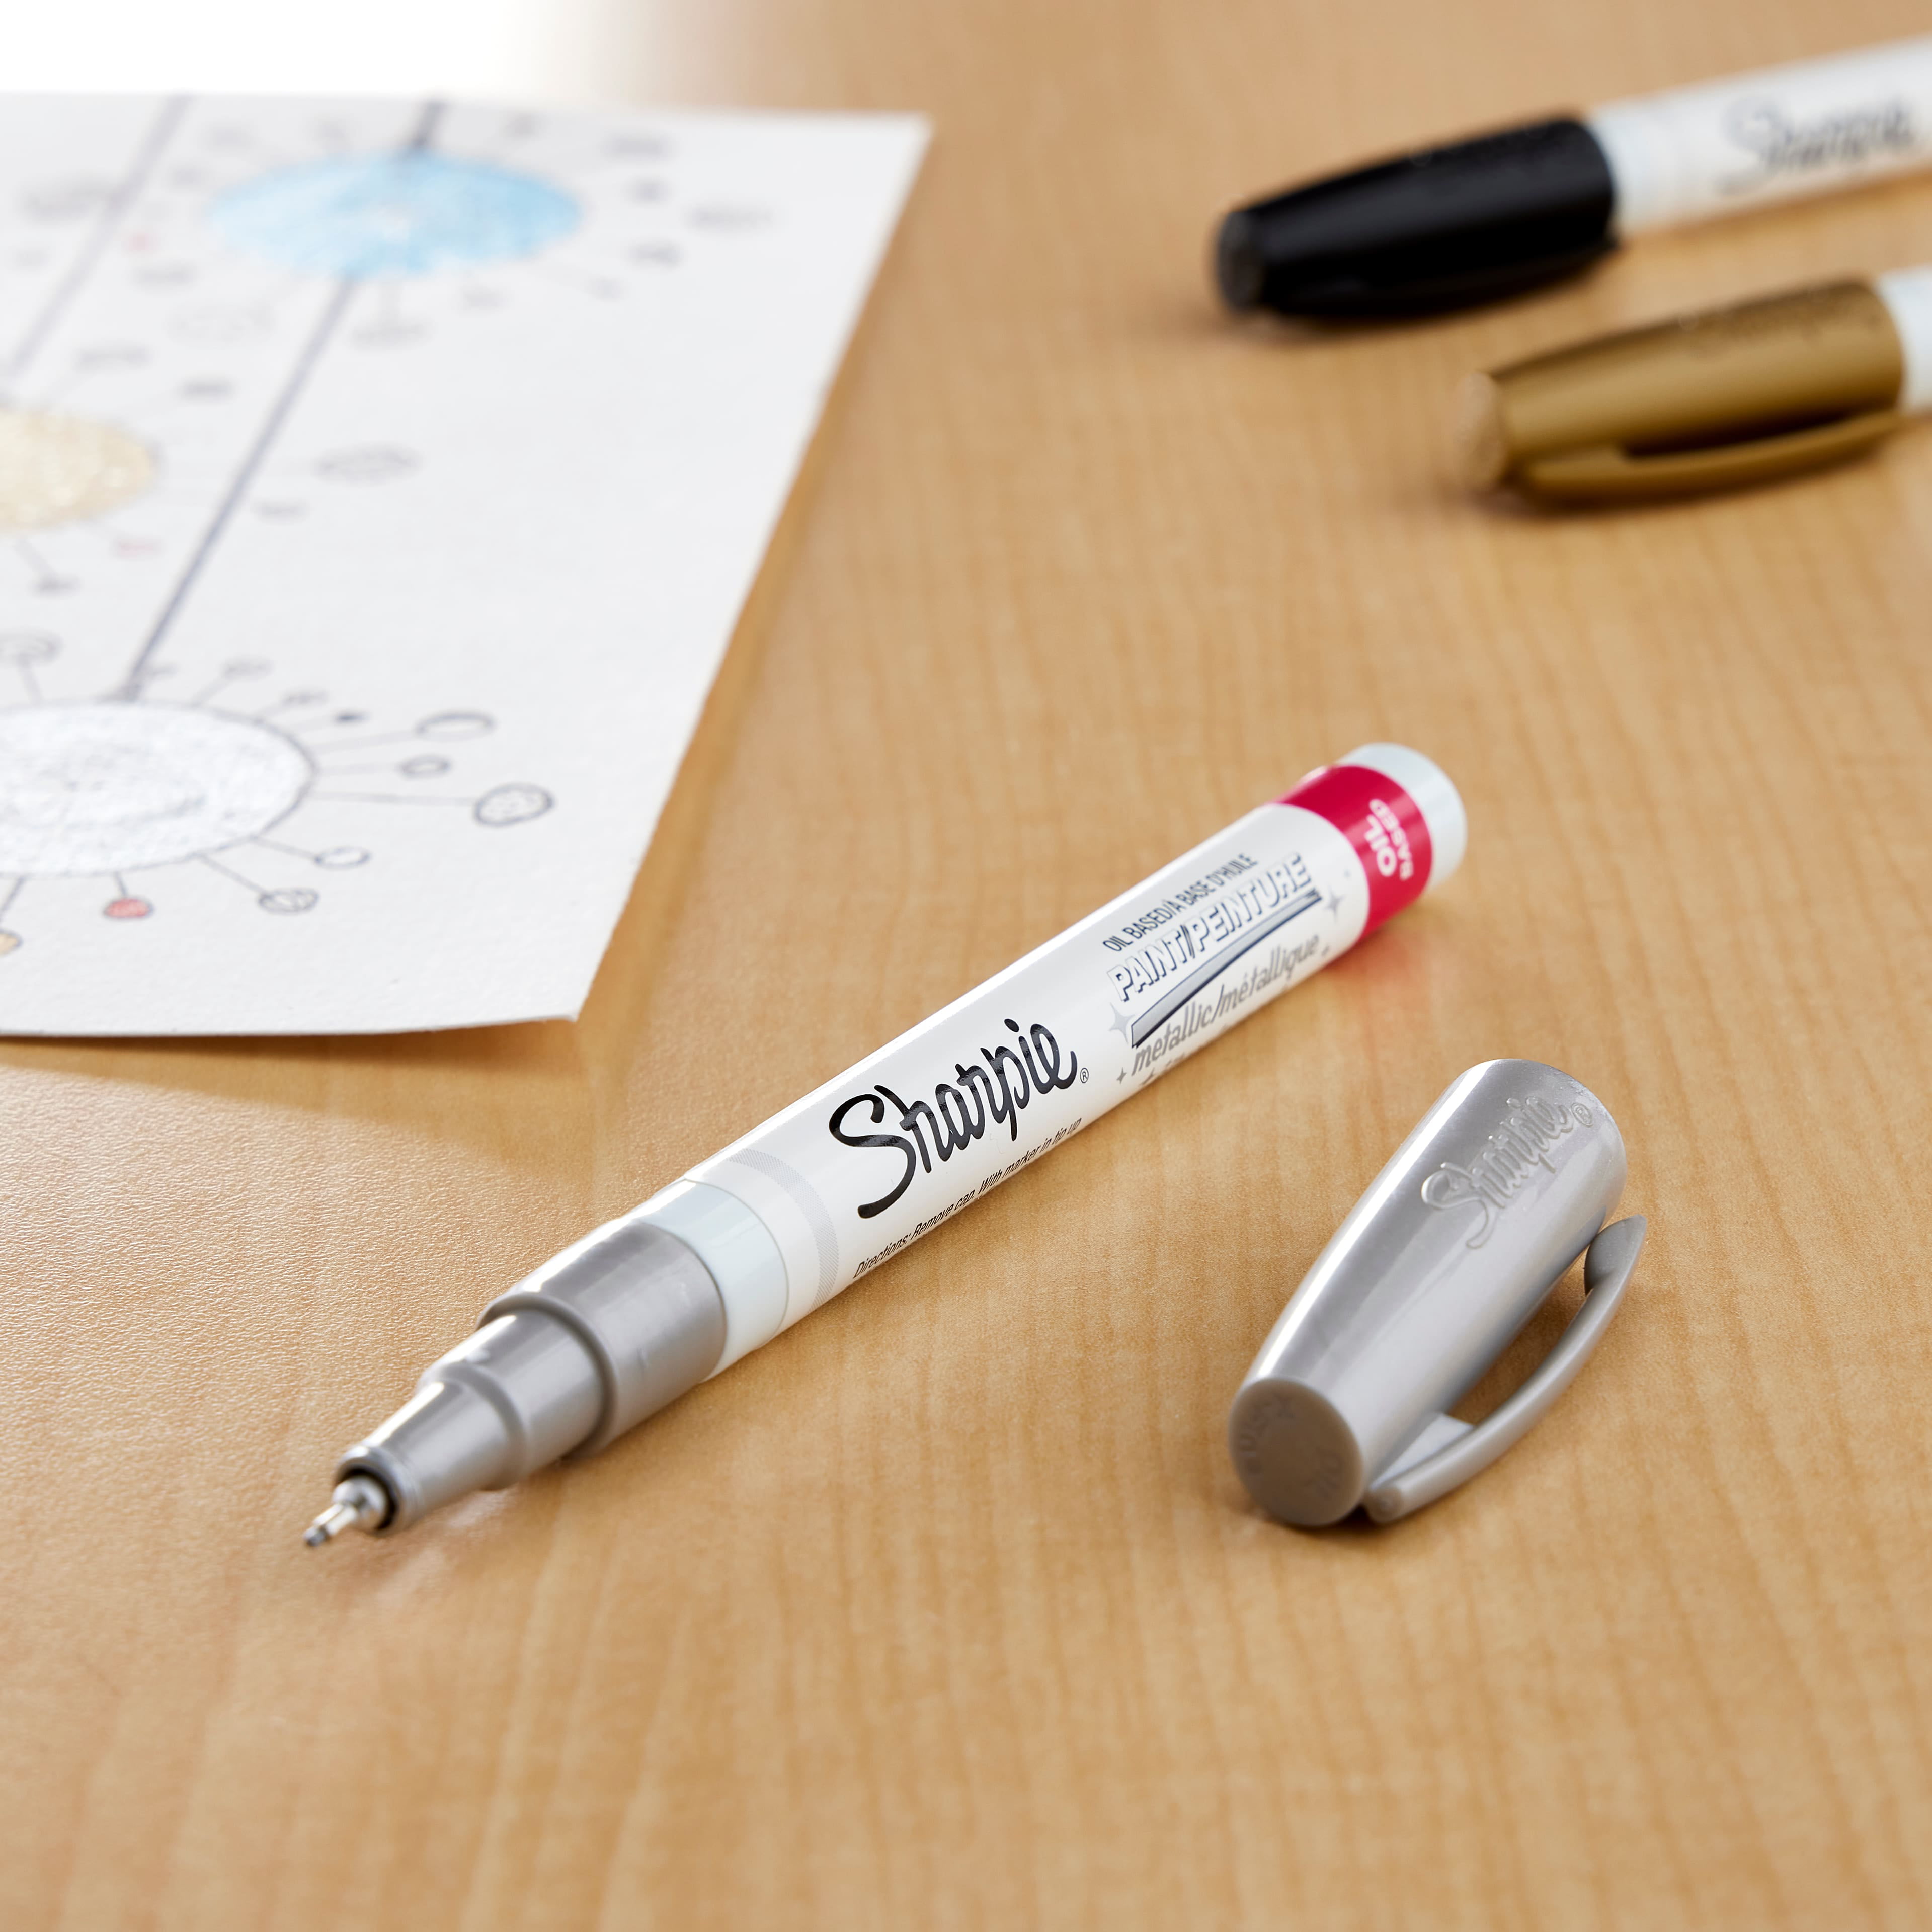 Sharpie Oil-Based Paint Marker - Extra-Fine - Silver